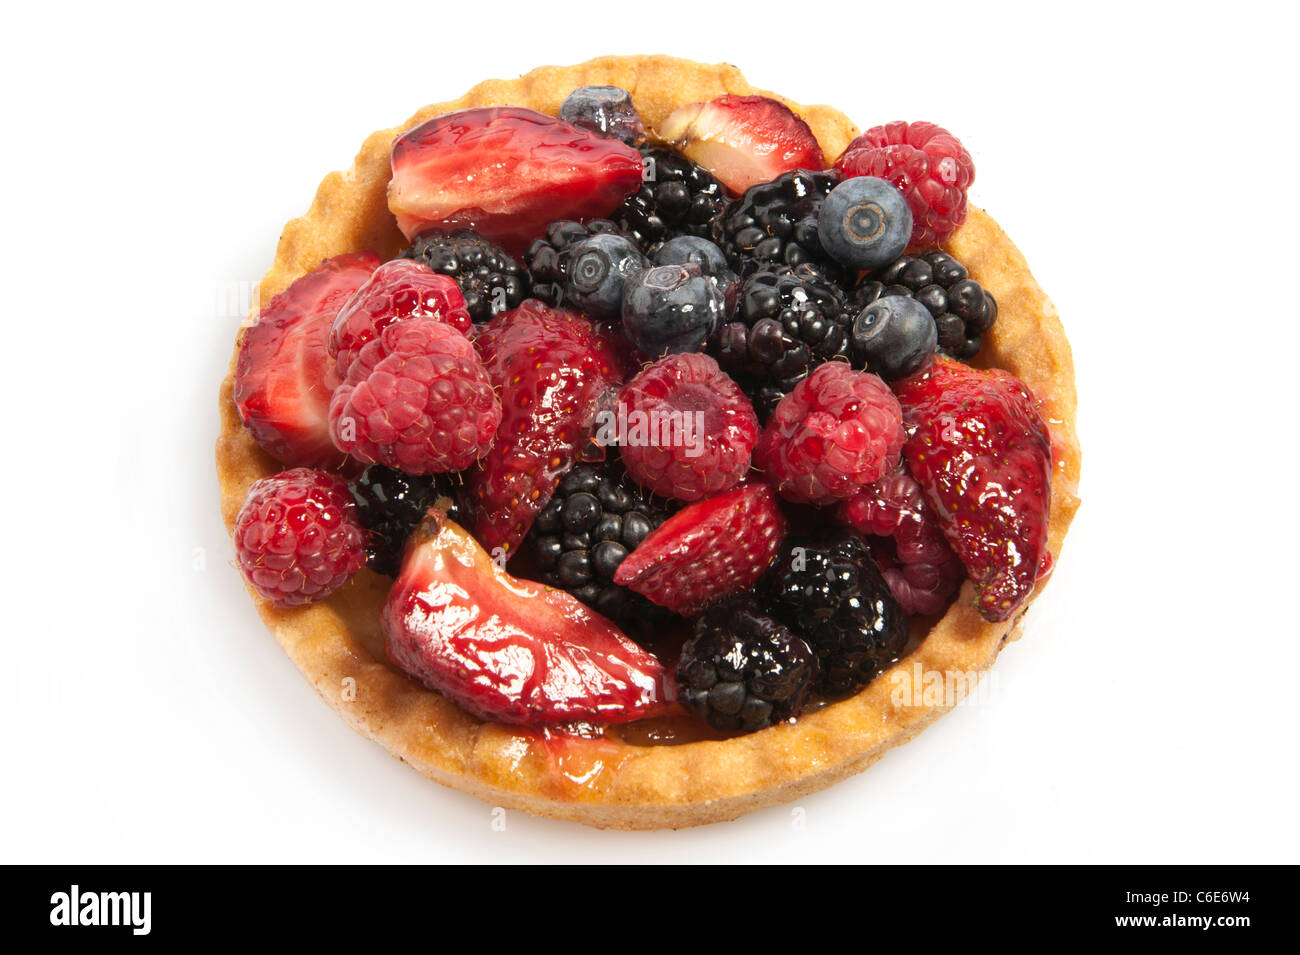 One cakes with berries on white background Stock Photo